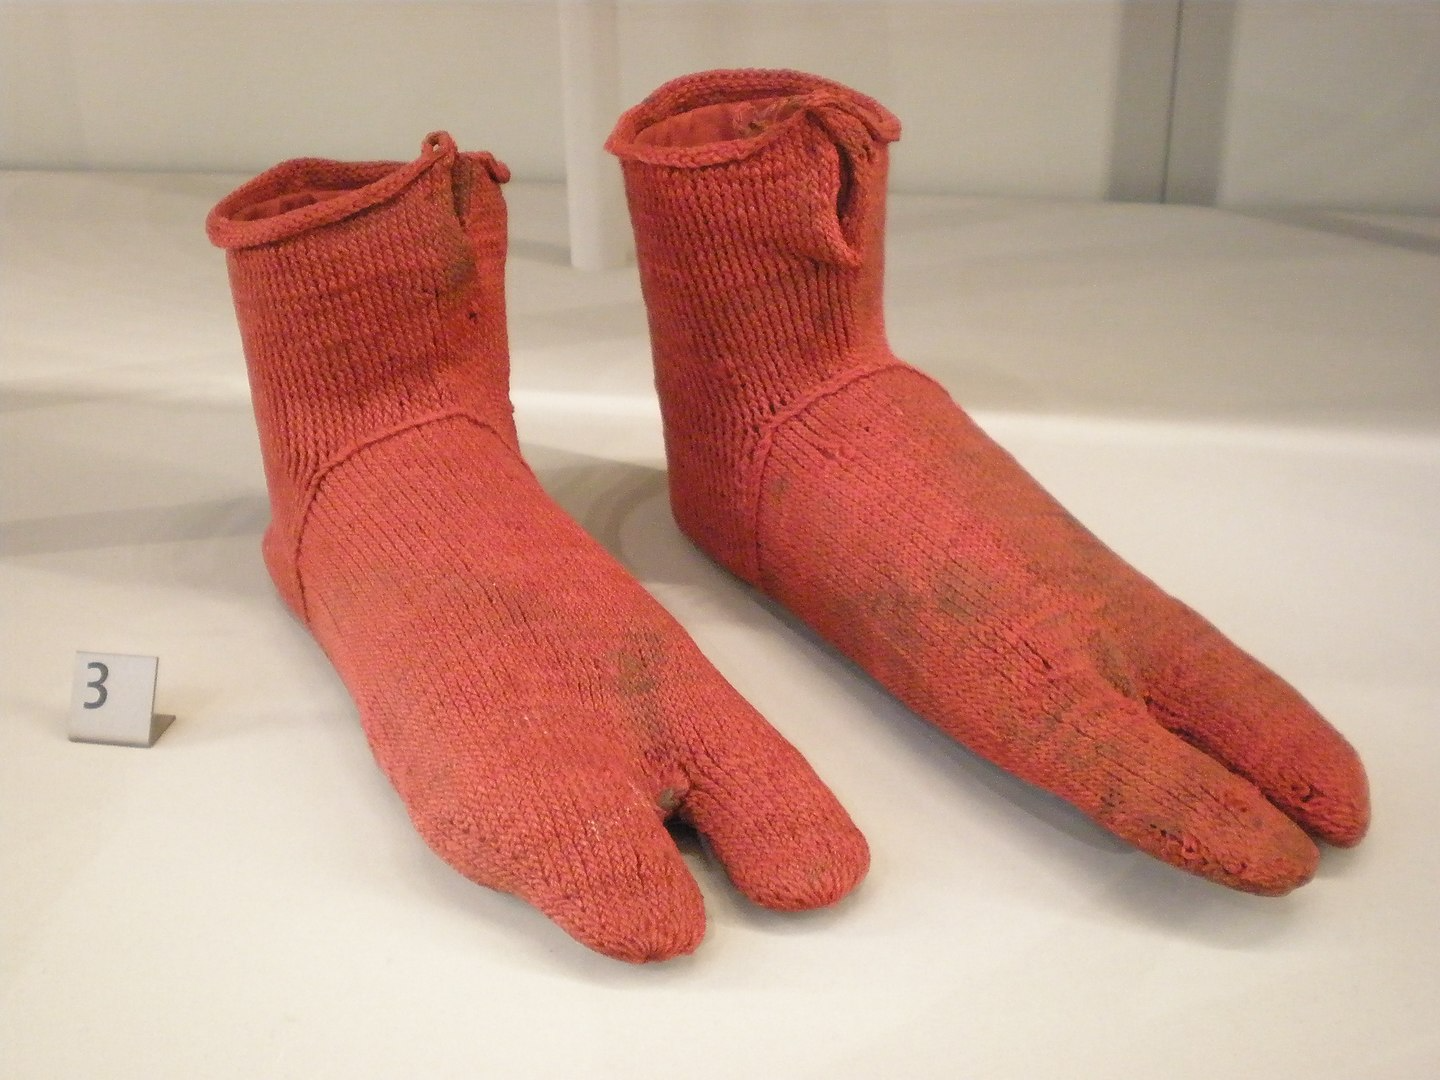 Behold 1,600-Year-Old Egyptian Socks Made with Nålbindning, an Ancient Proto-Knitting Technique